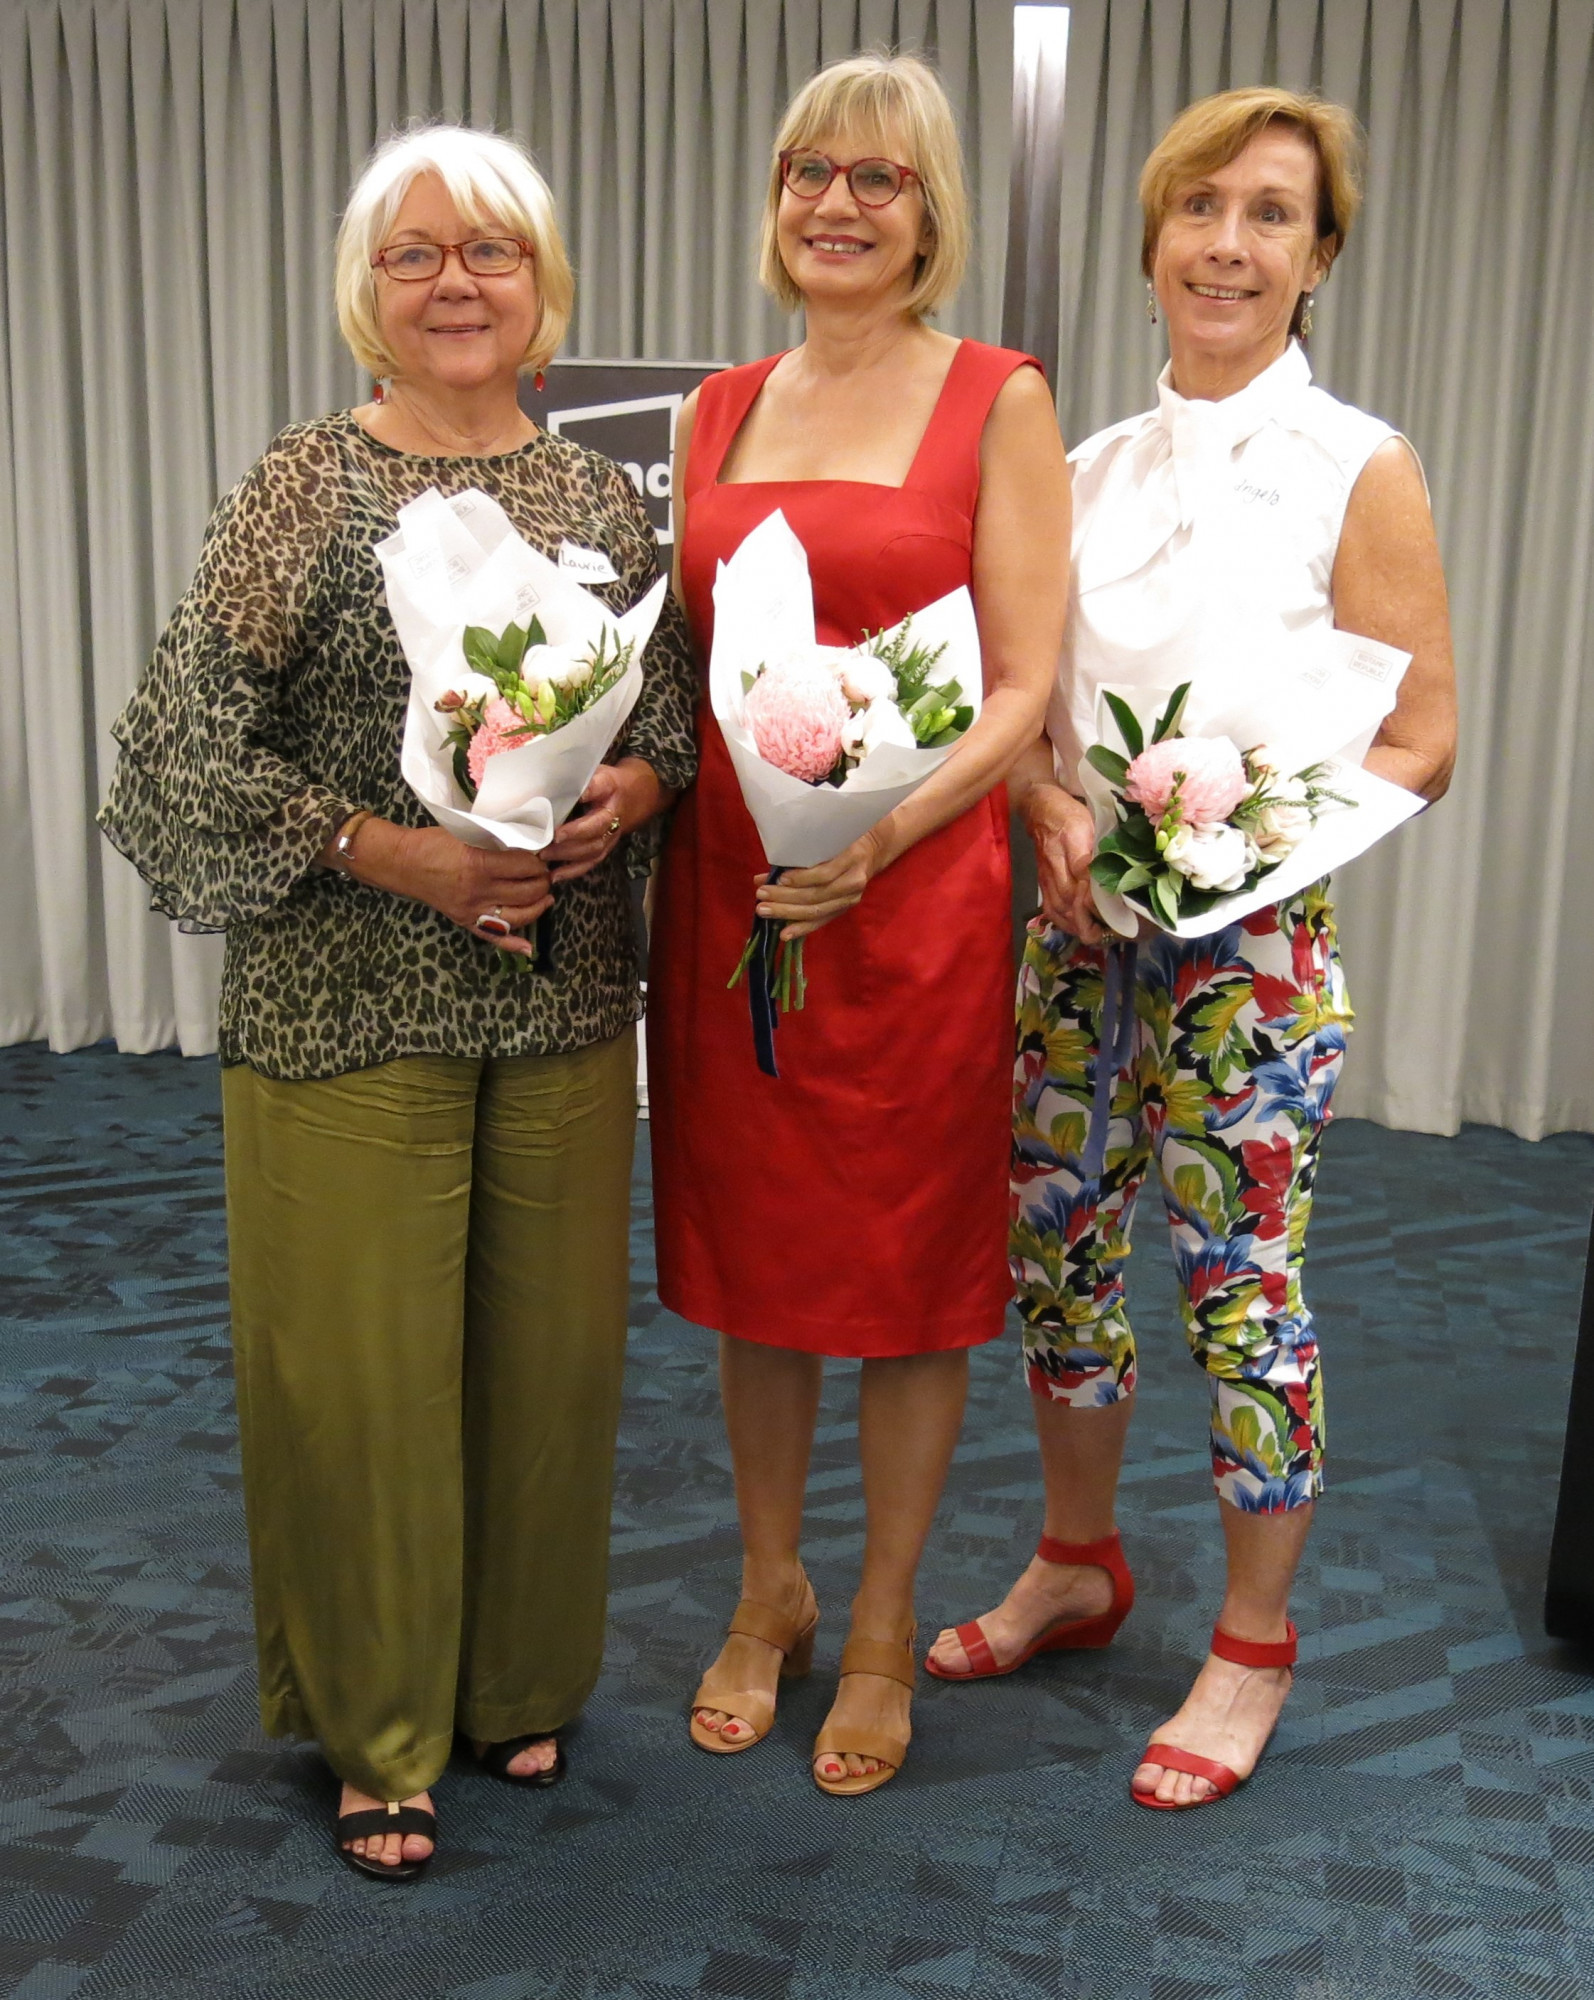 Local writers Laurie Trott, Kerstin Pilz and Angela Murphy spoke at the writer’s breakfast.